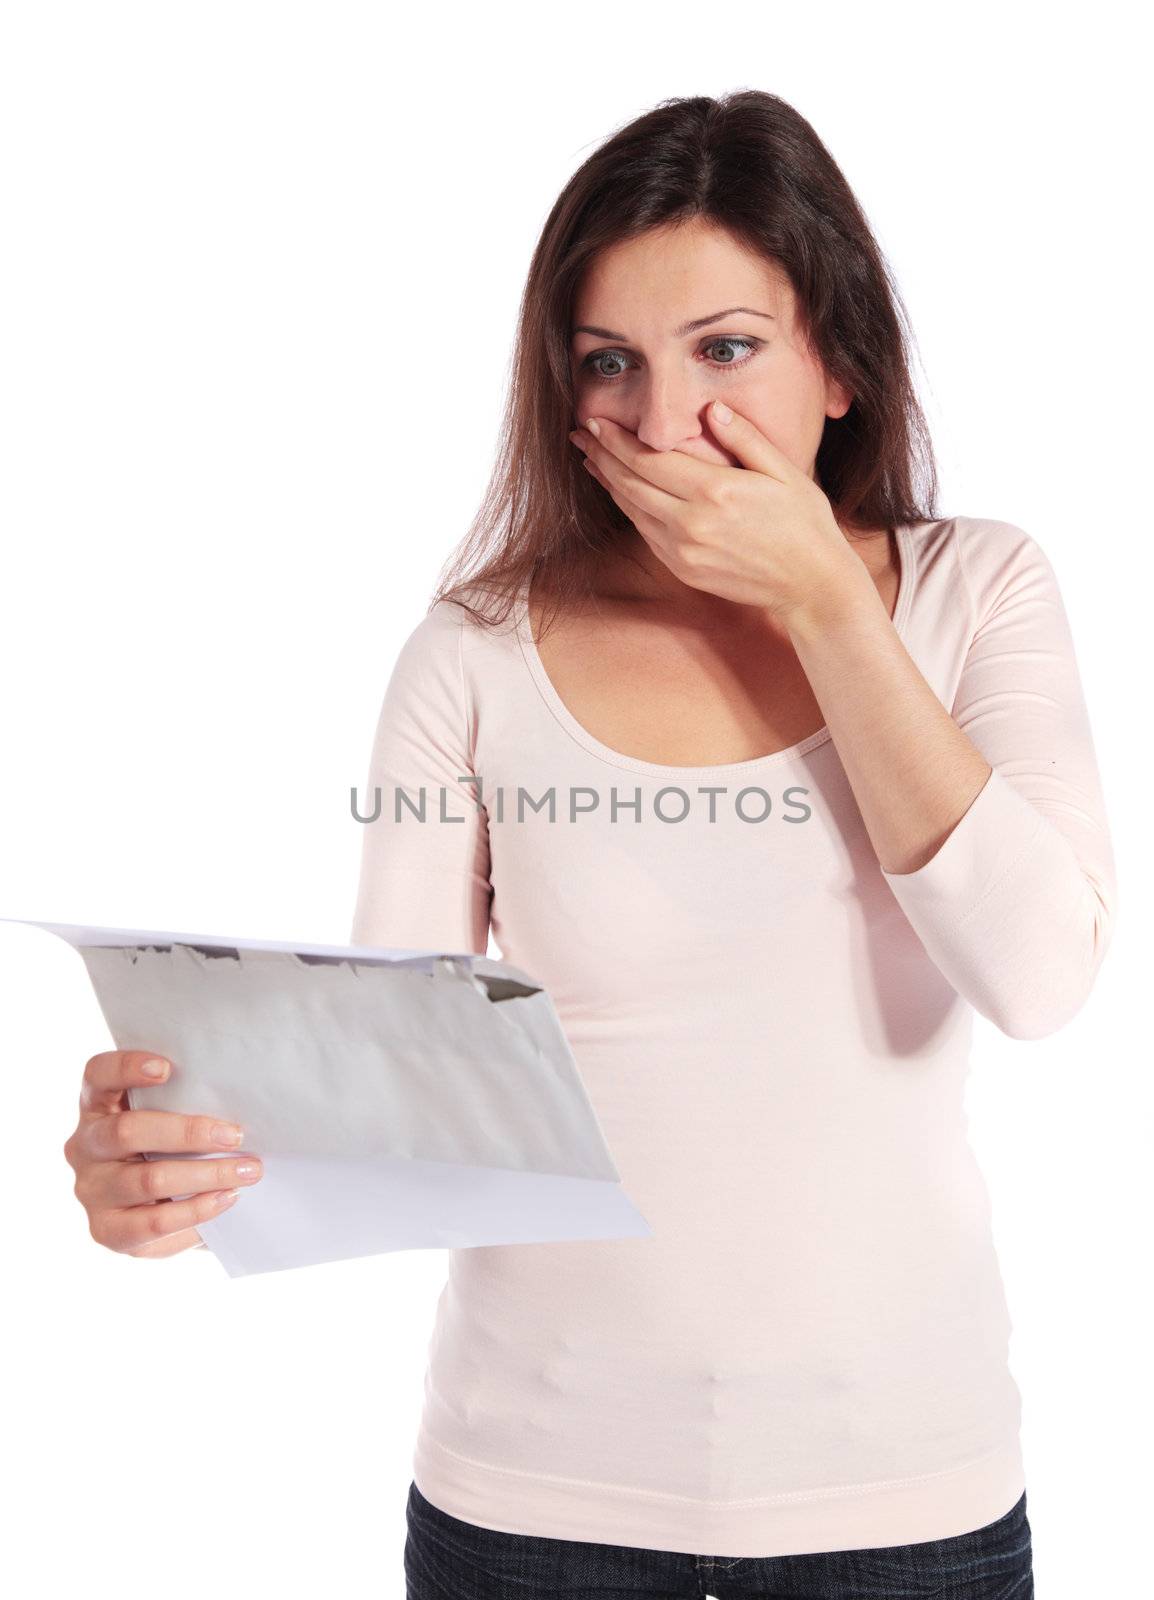 Attractive young woman getting bad news. All isolated on white background.